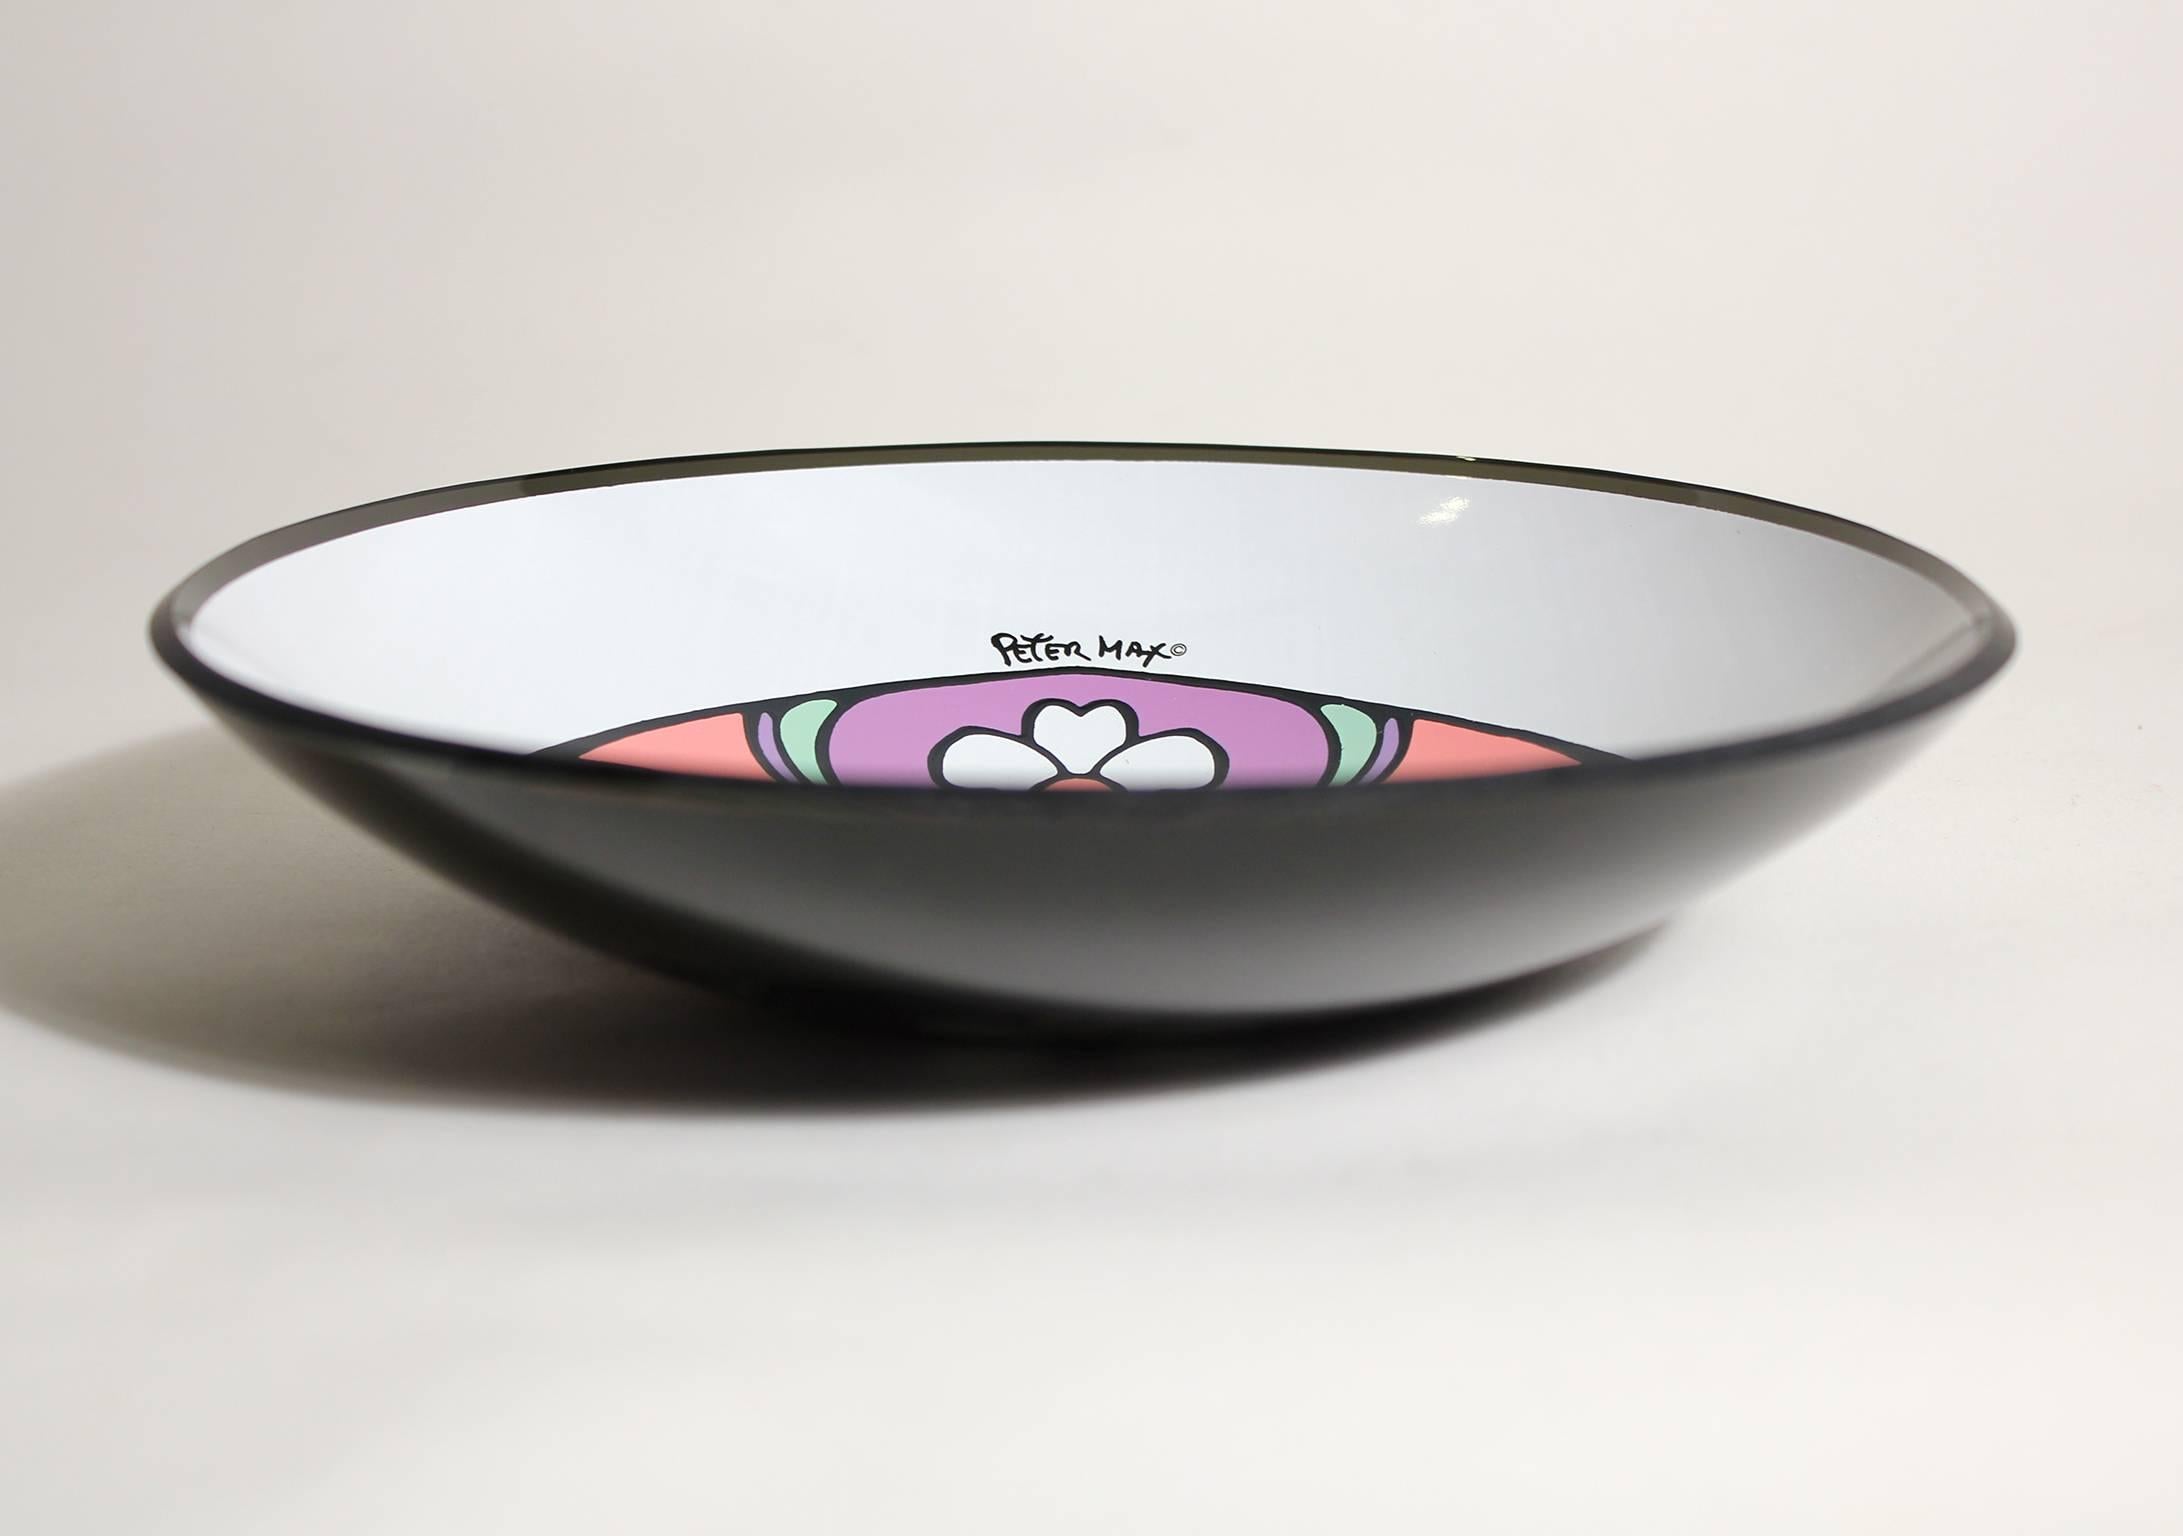 Great pop-art Peter Max glass bowl. In excellent shape with no condition issues. Measures 7